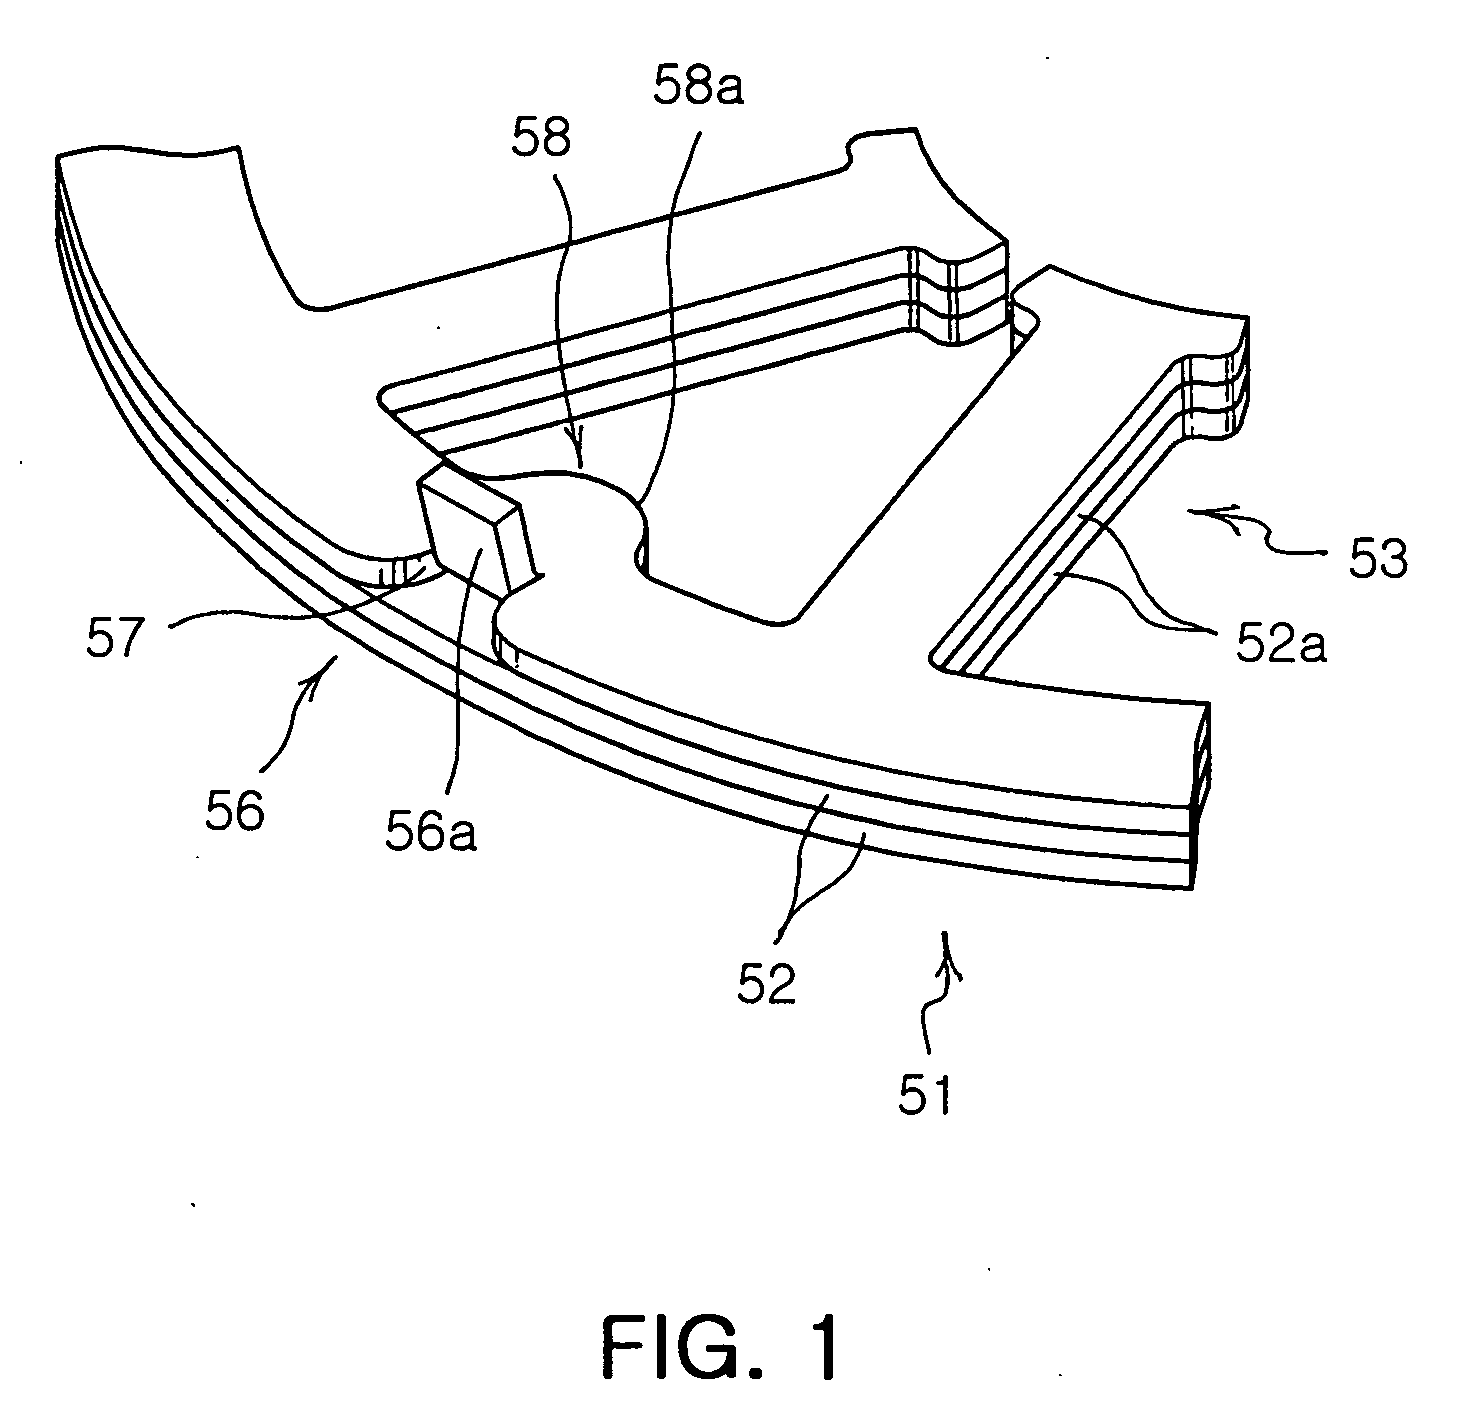 Stator and electric motor having the same